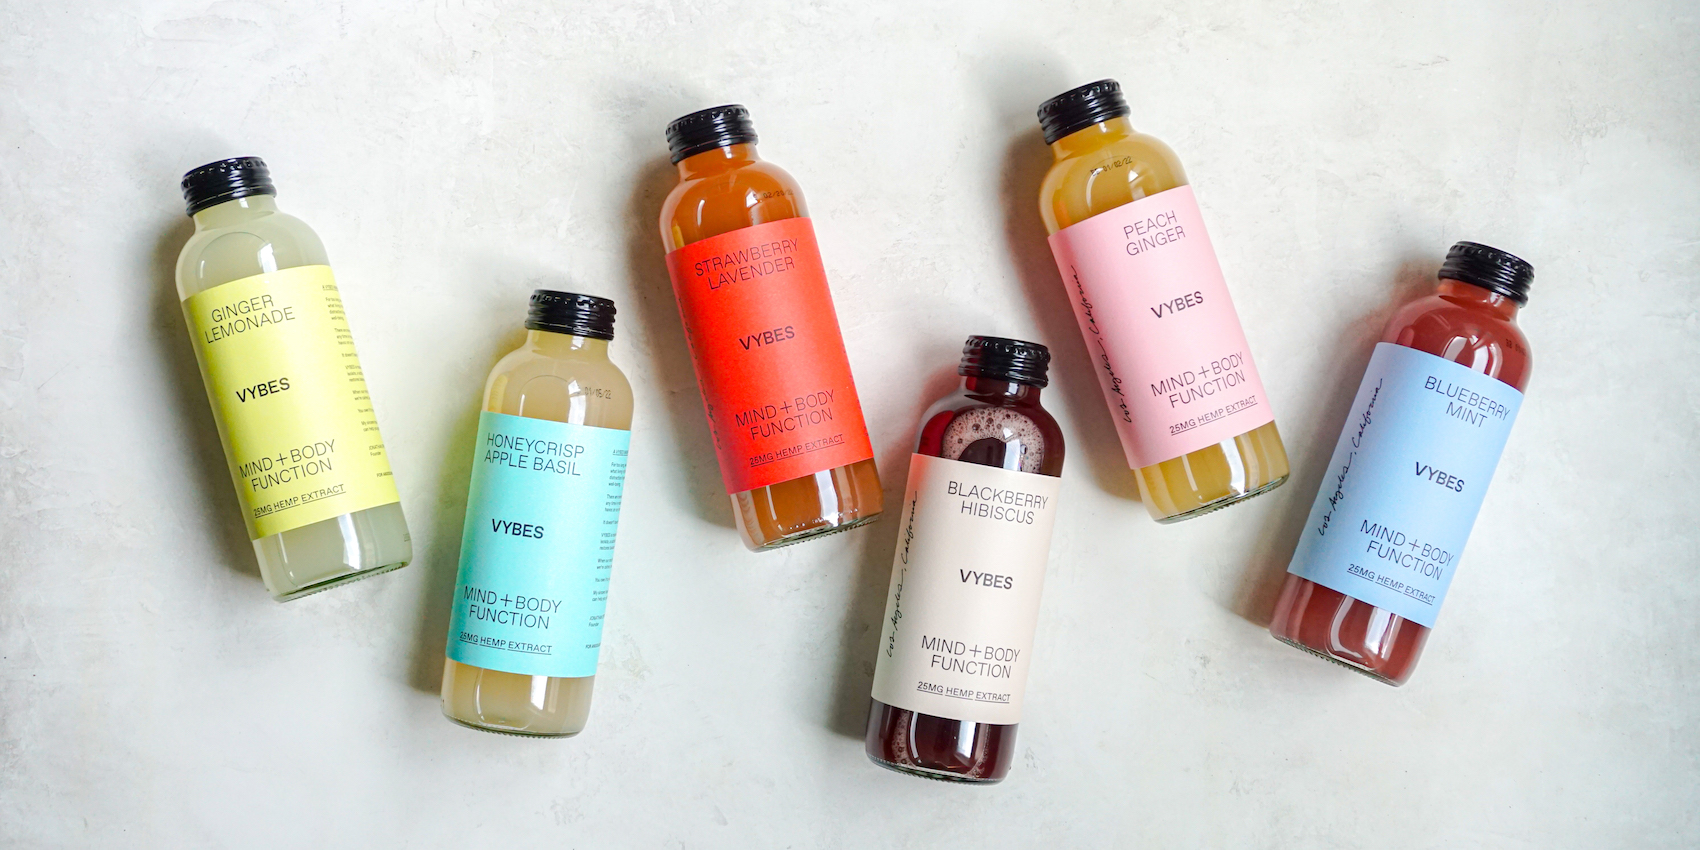 VYBES CBD infused drinks